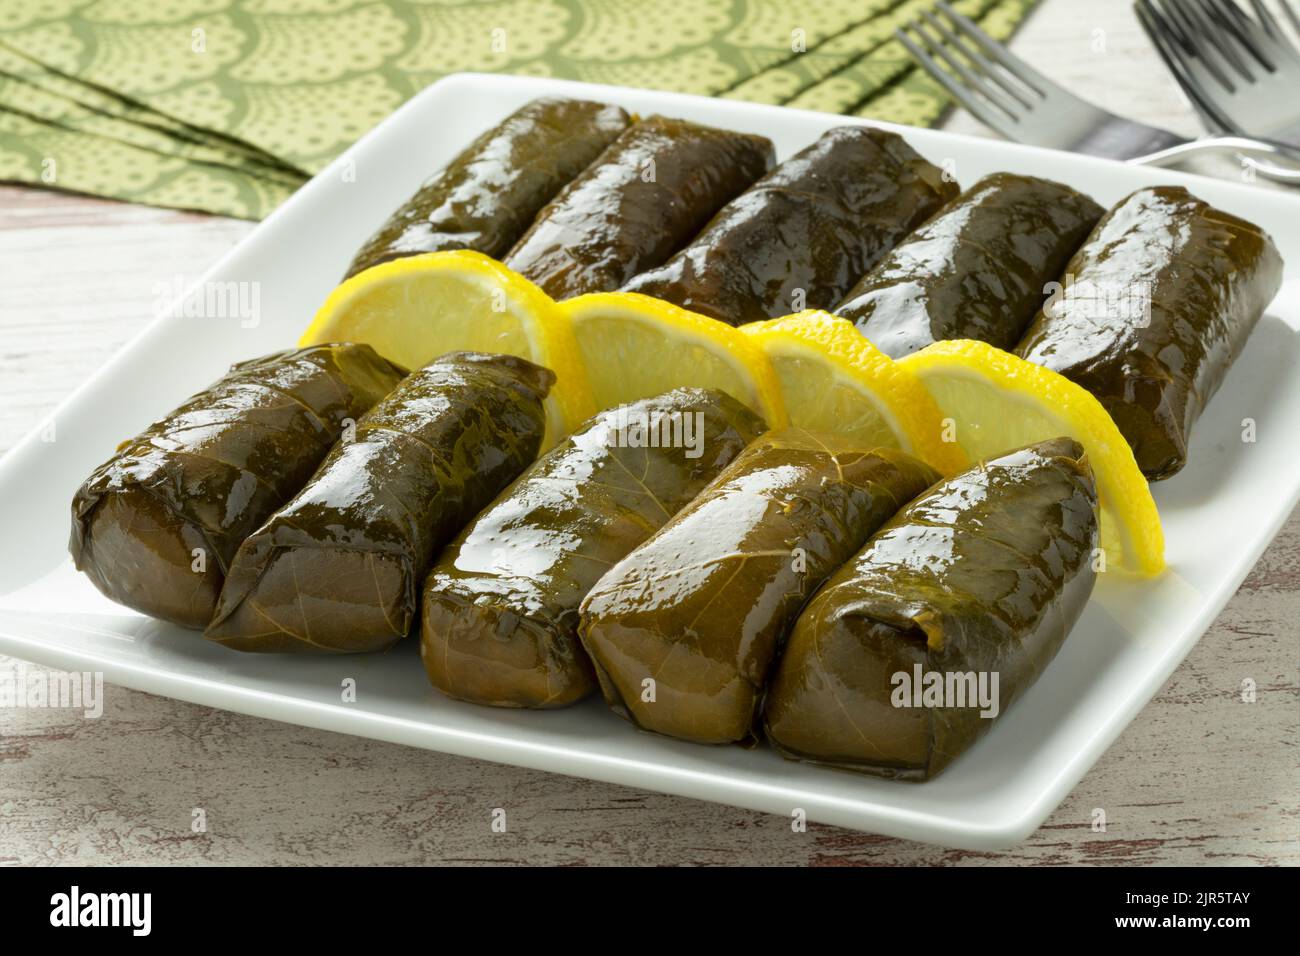 Plate with Greek dolmades and lemon close up on the table Stock Photo